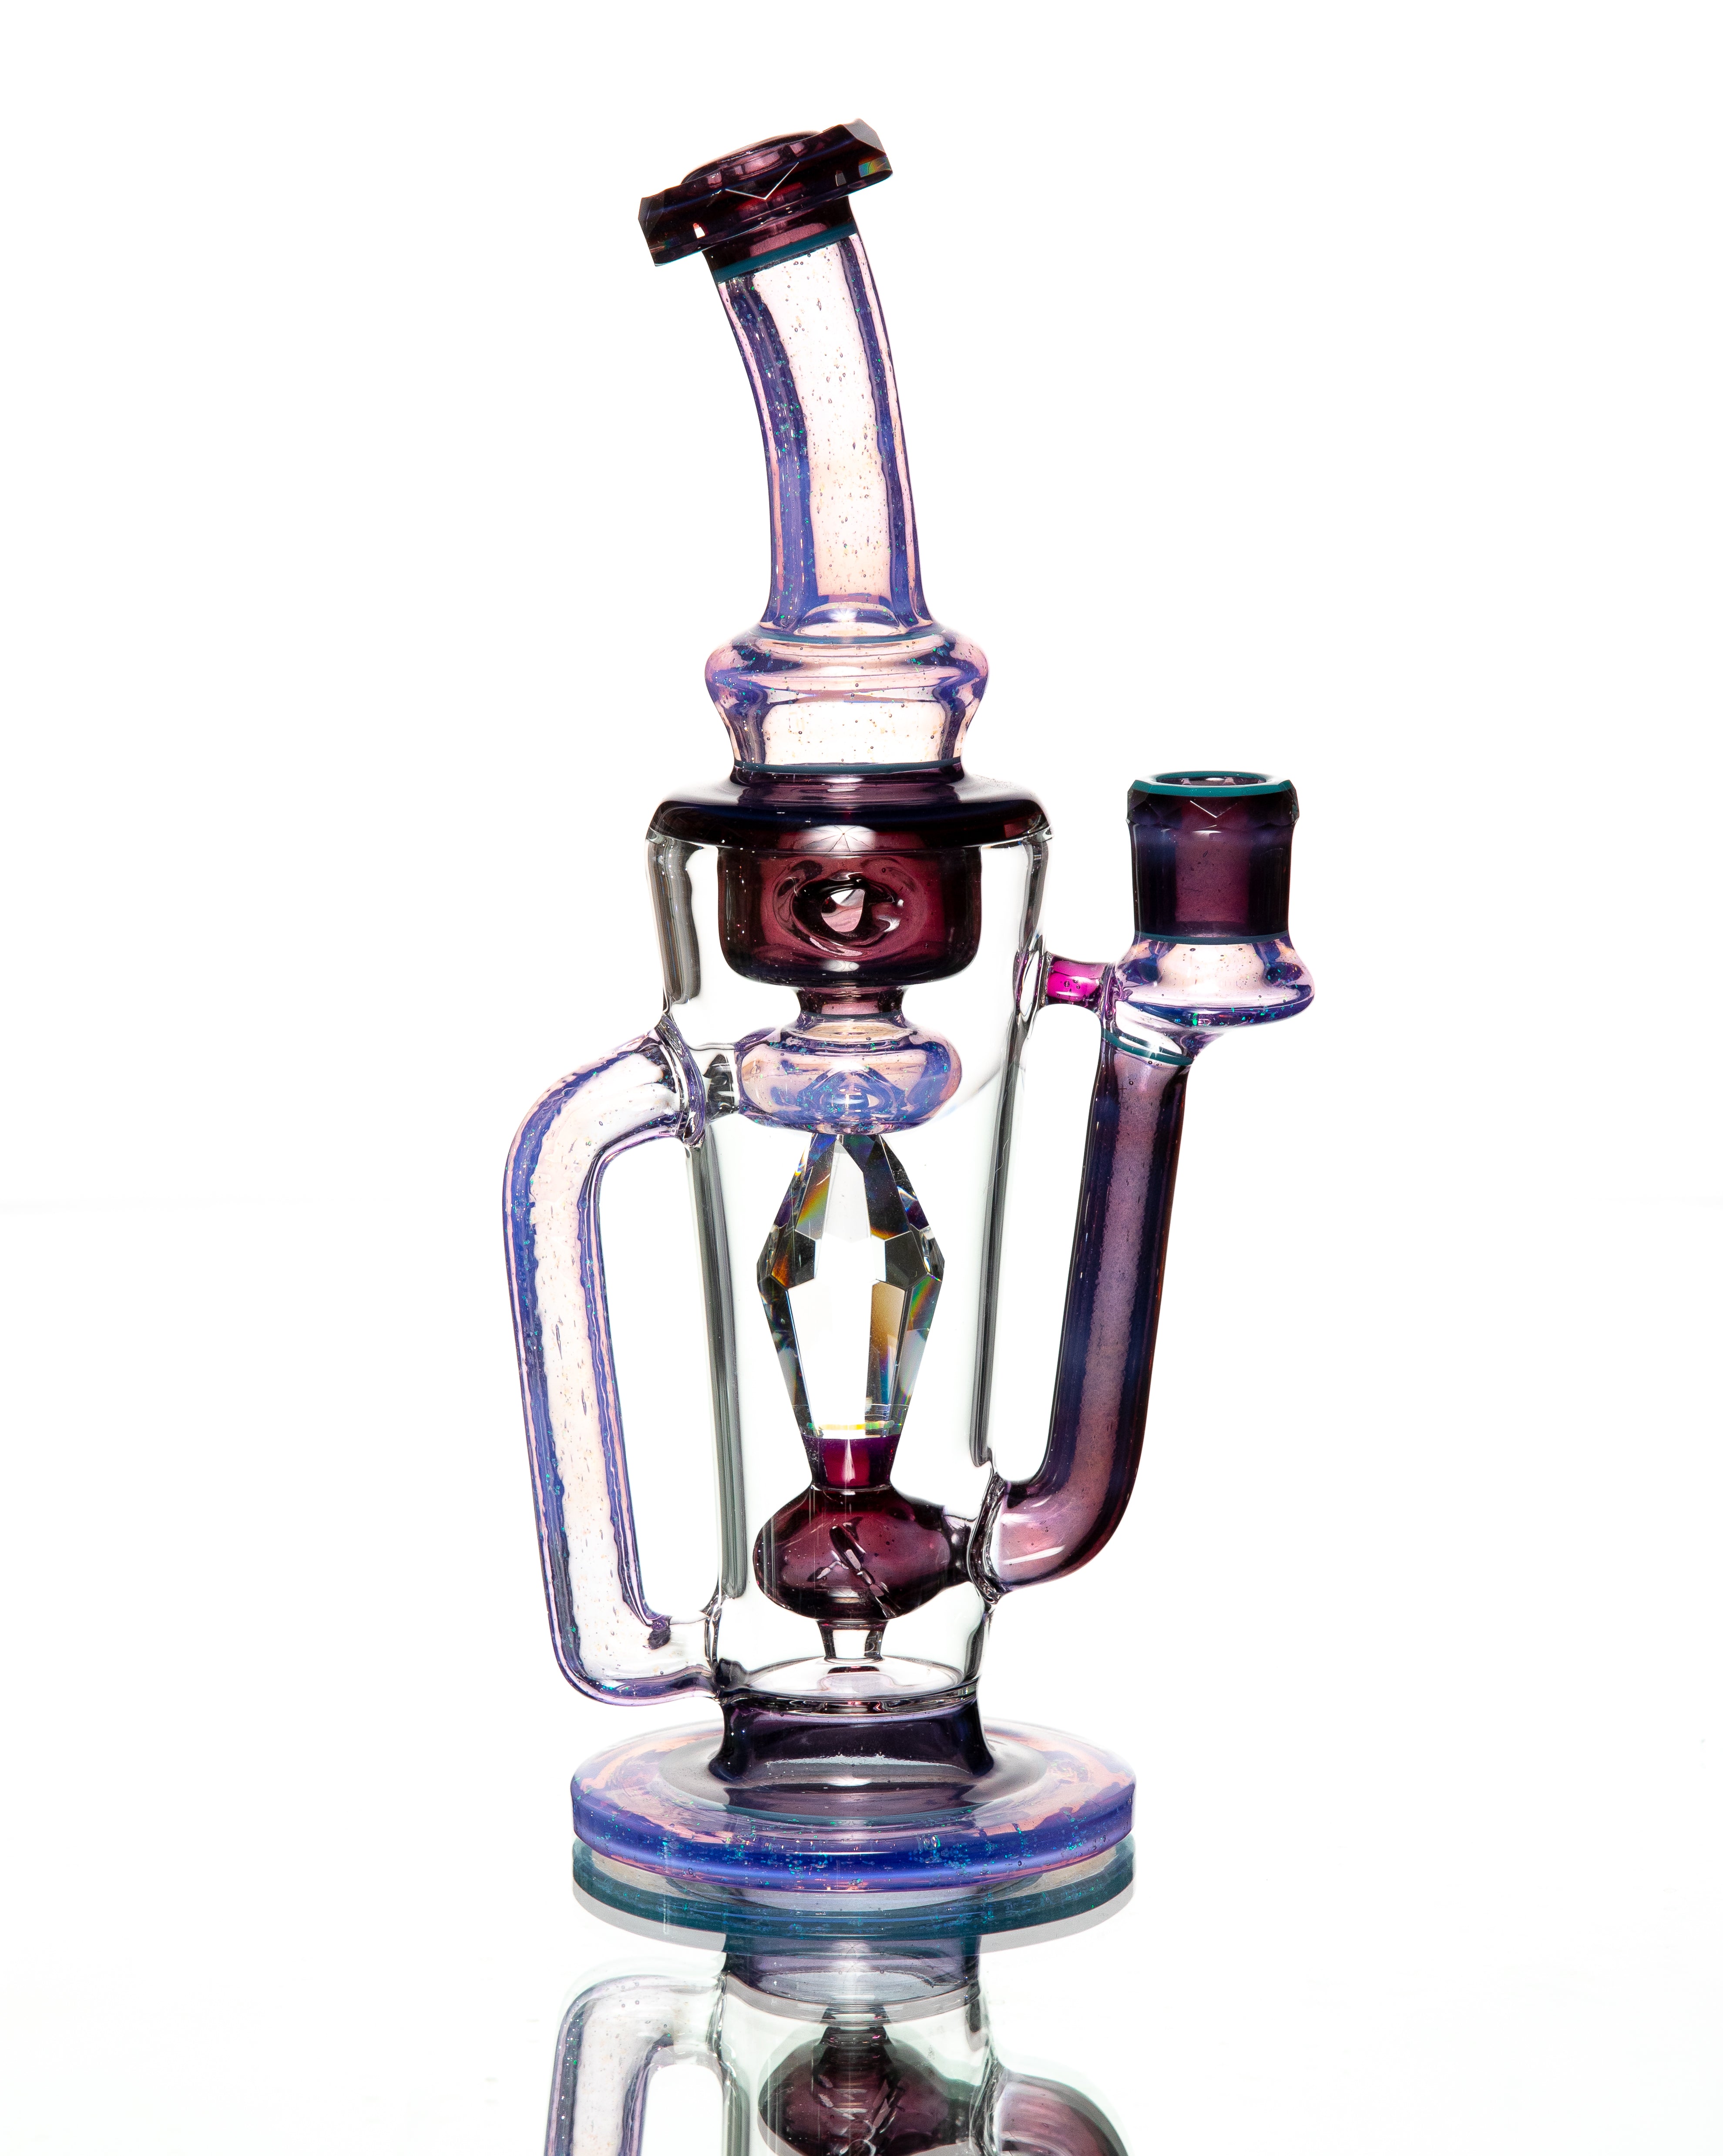 Gobs Glass - Blue/Purple Recycler